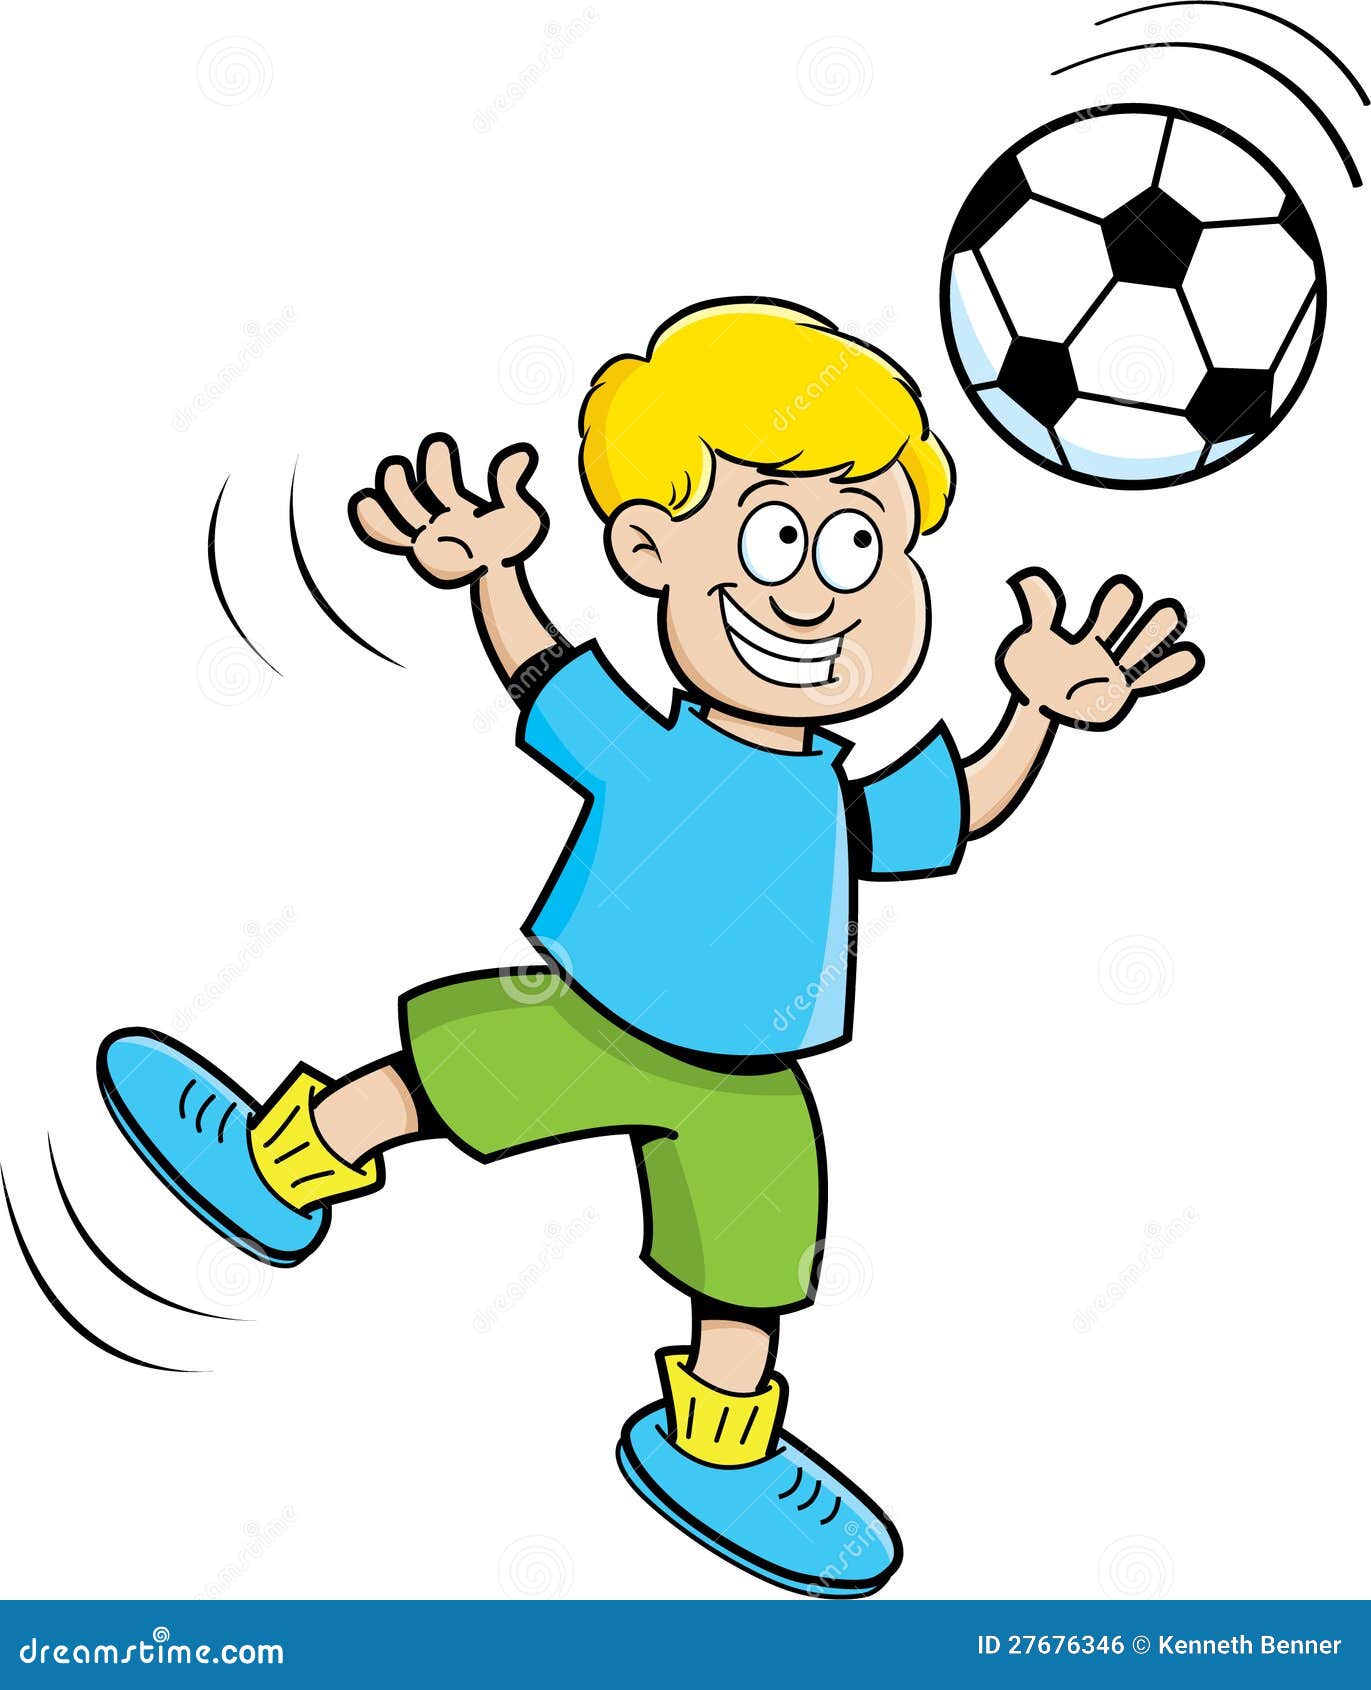 clipart girl playing soccer - photo #40